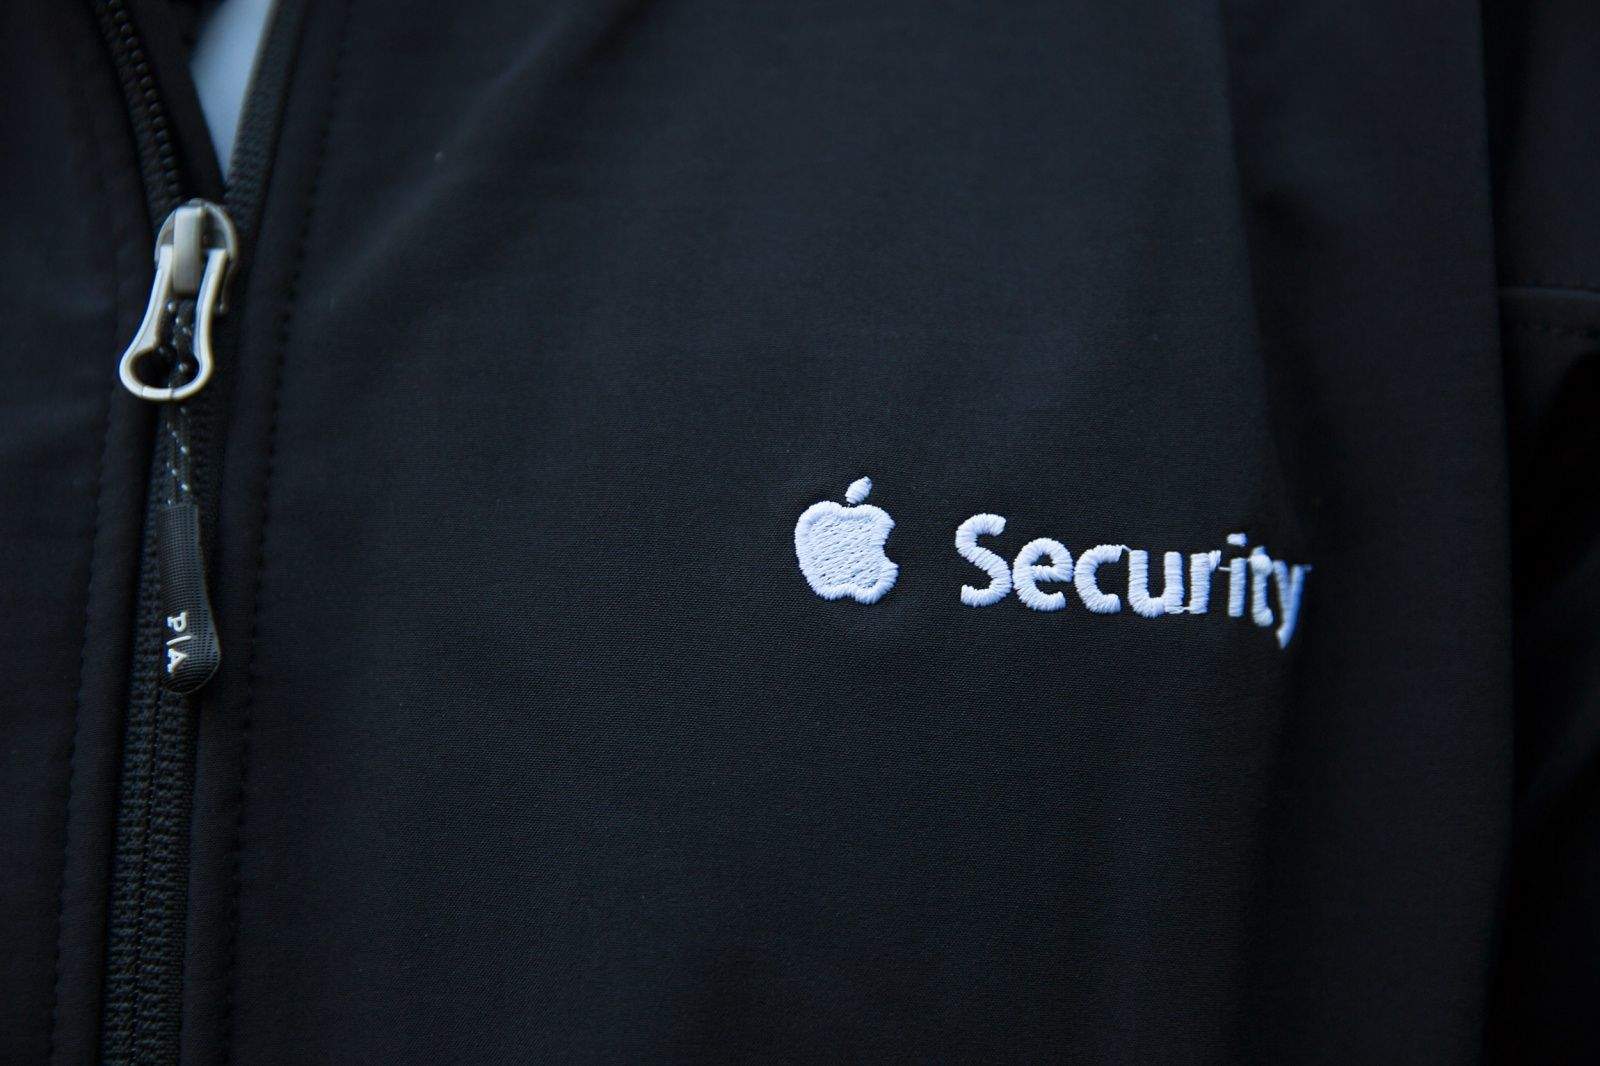 Apple: There is "no evidence" that iPhone Mail vulnerabilities have been exploited in the wild 1